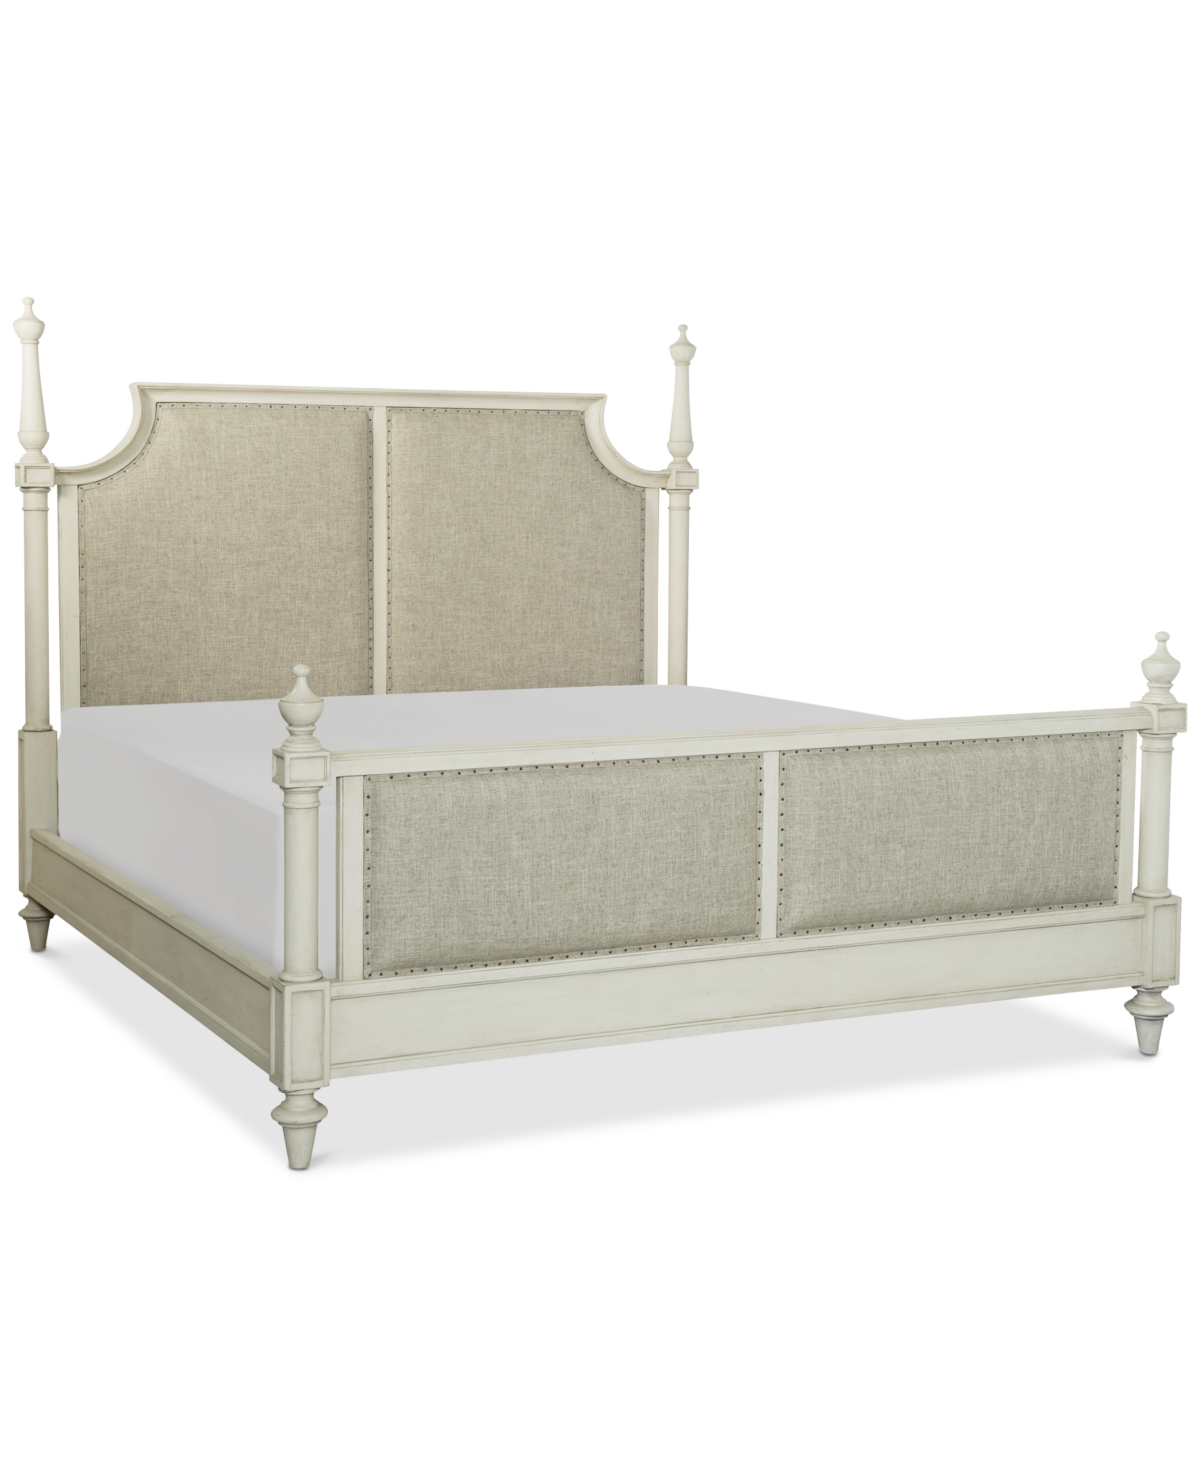 Barclay King Upholstered Bed